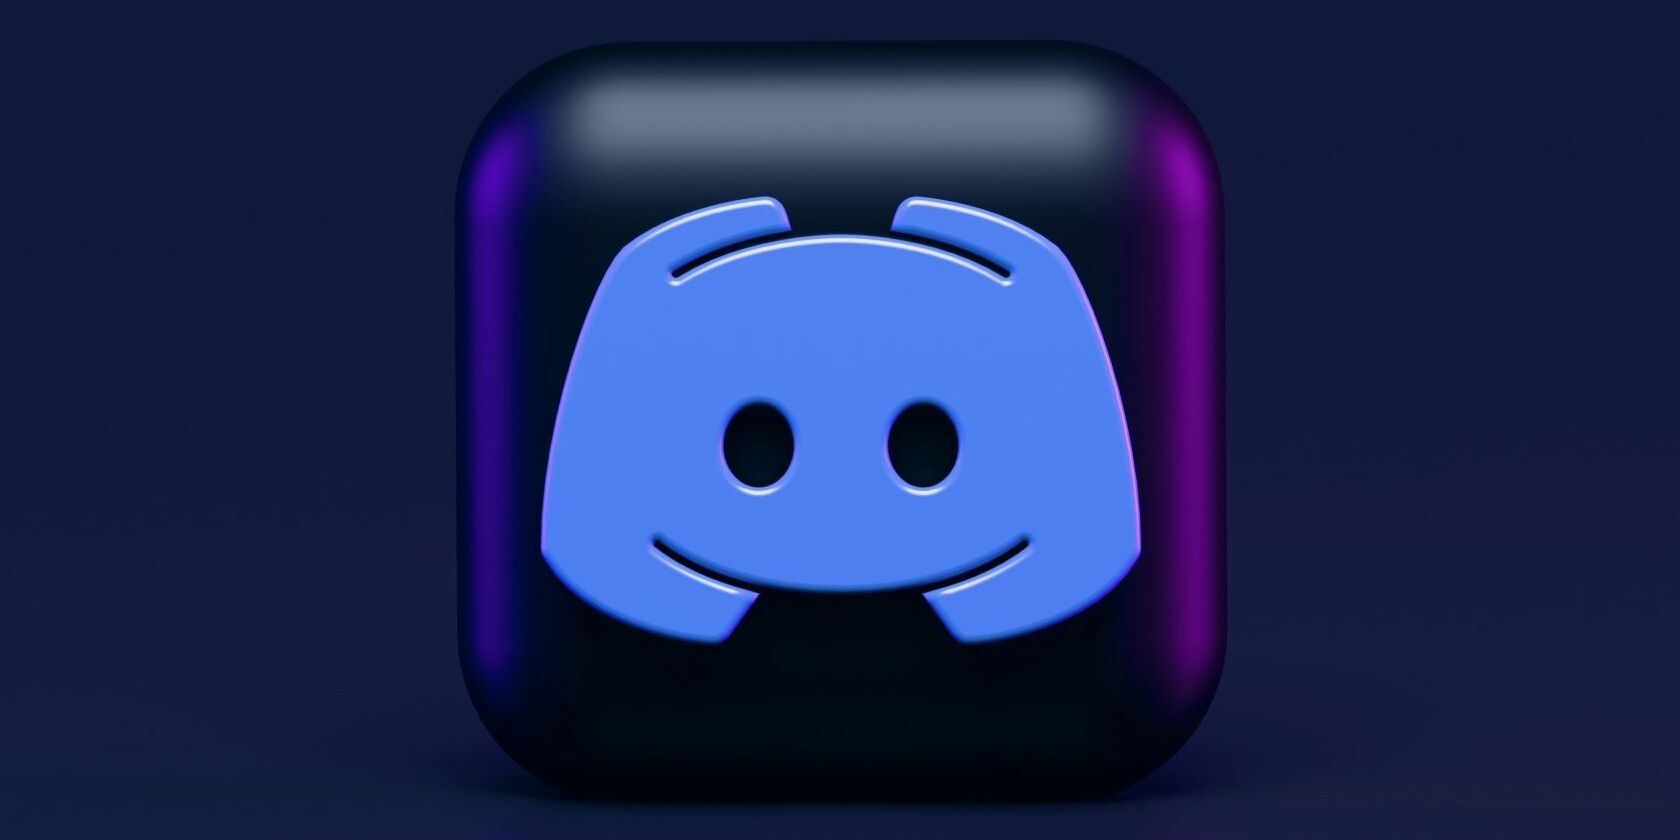 An image of the Discord logo on a black tablet